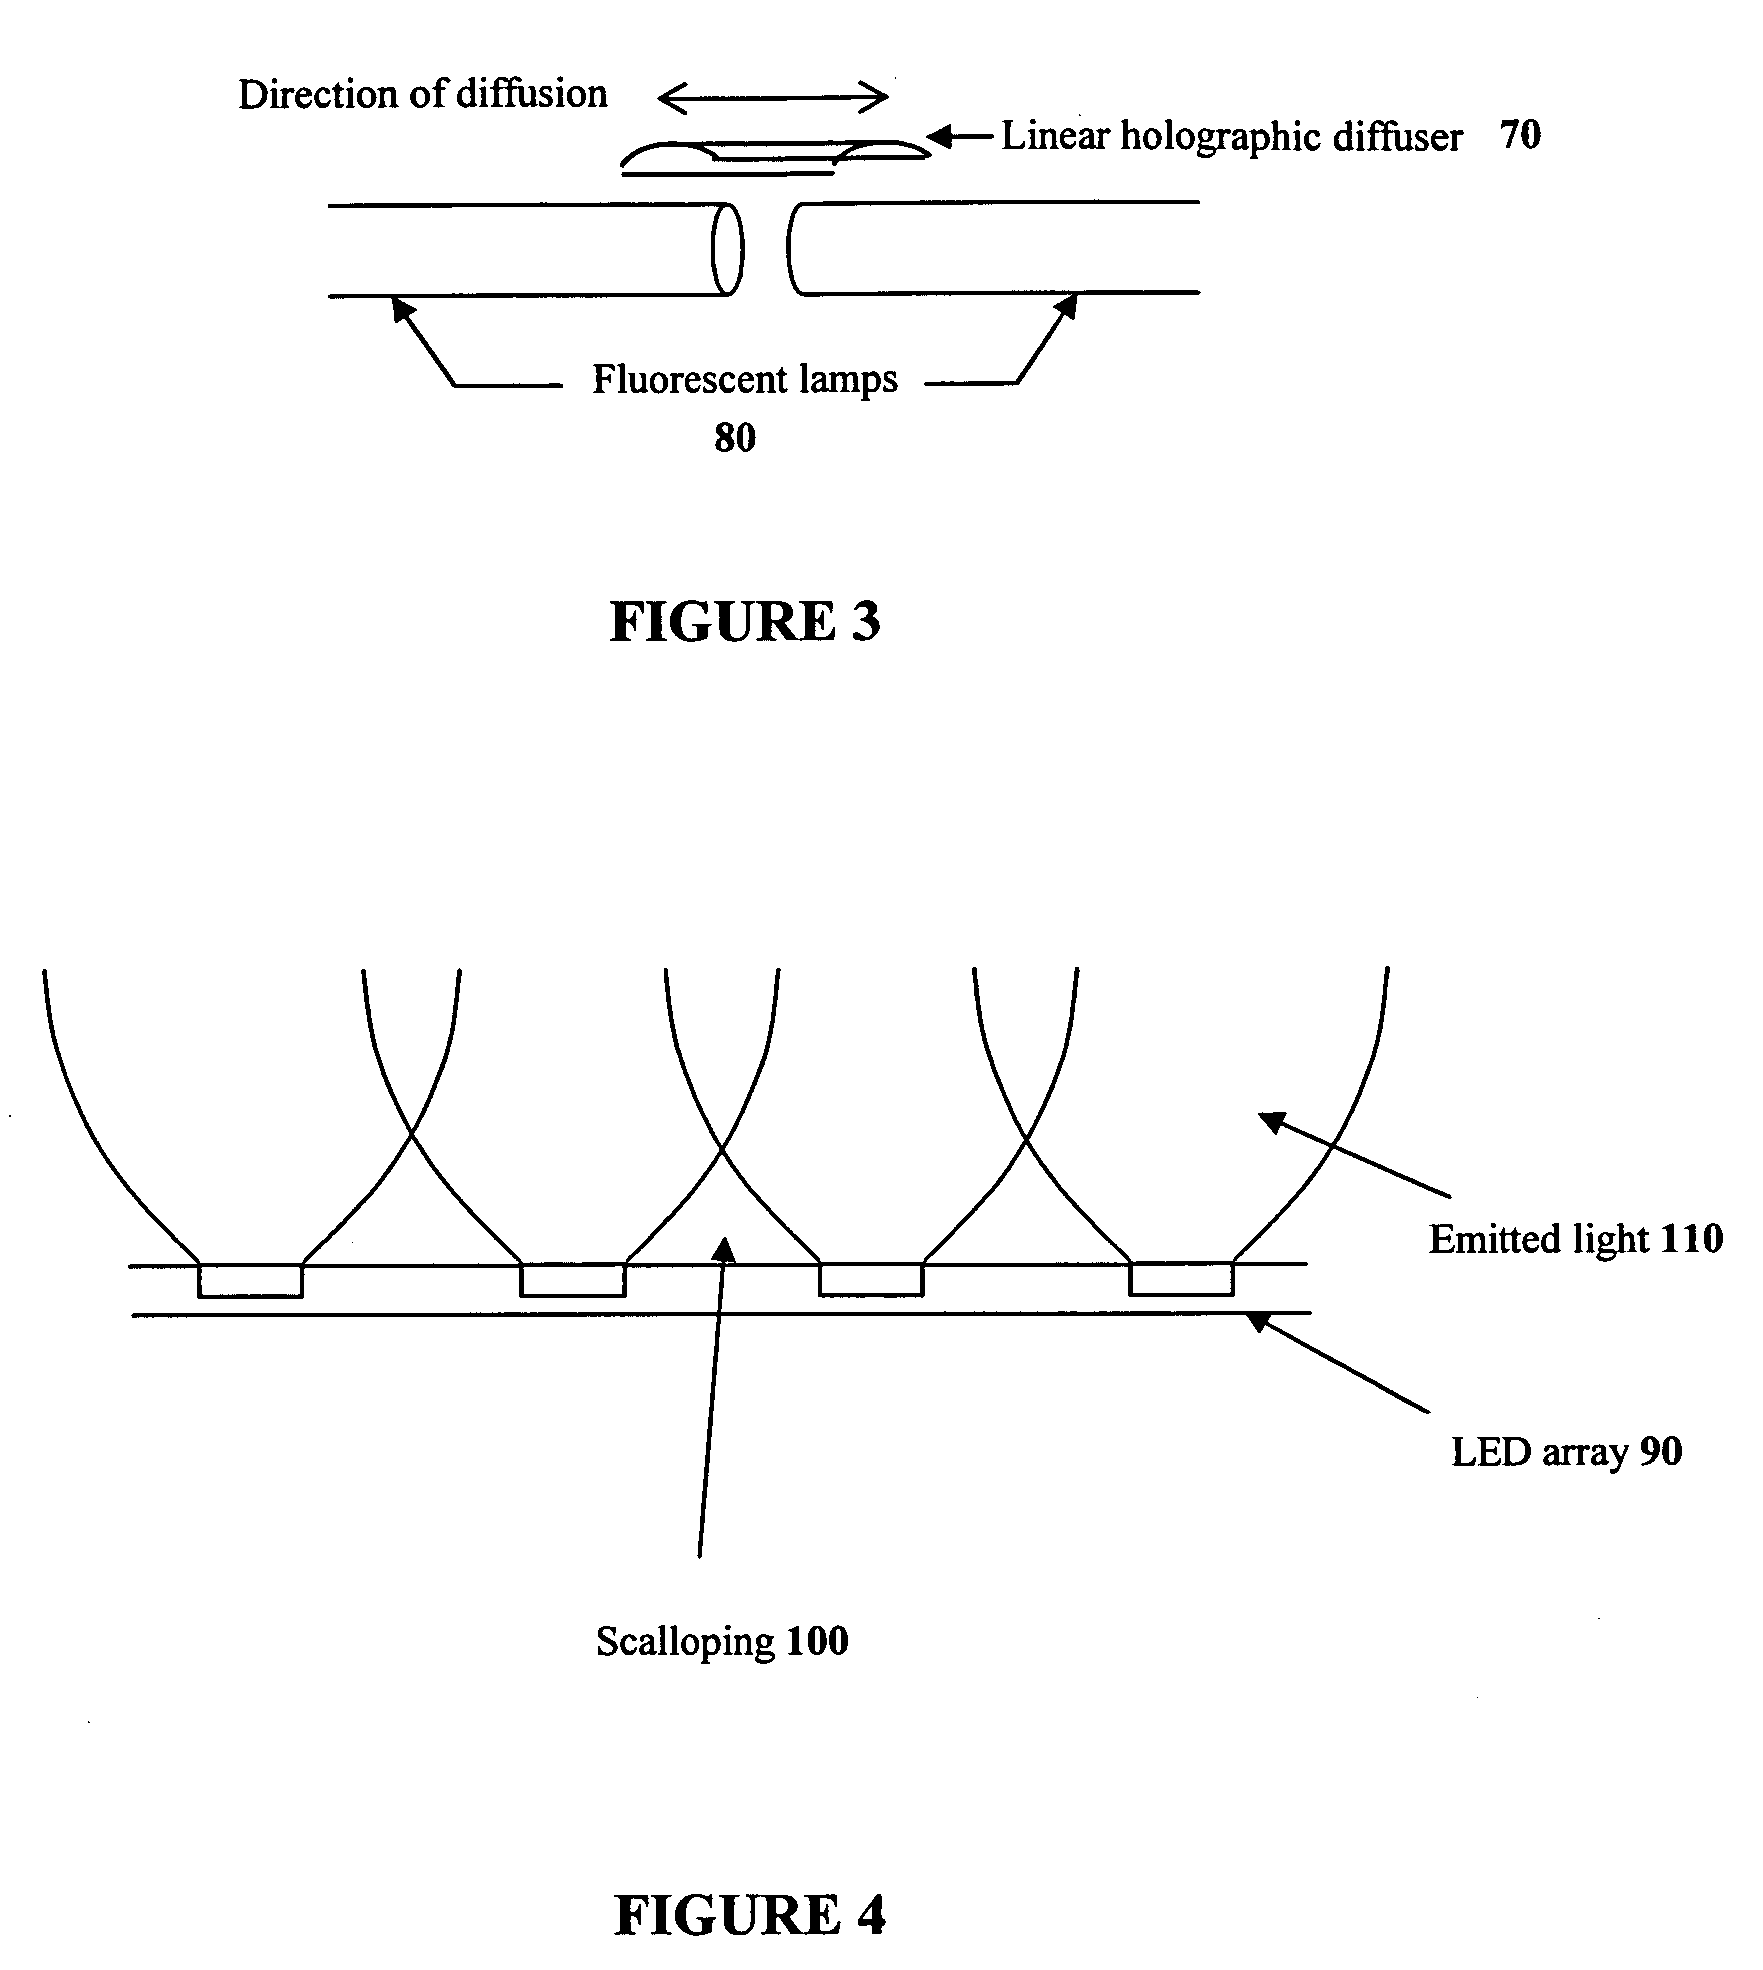 System and method for the diffusion of illumination produced by discrete light sources